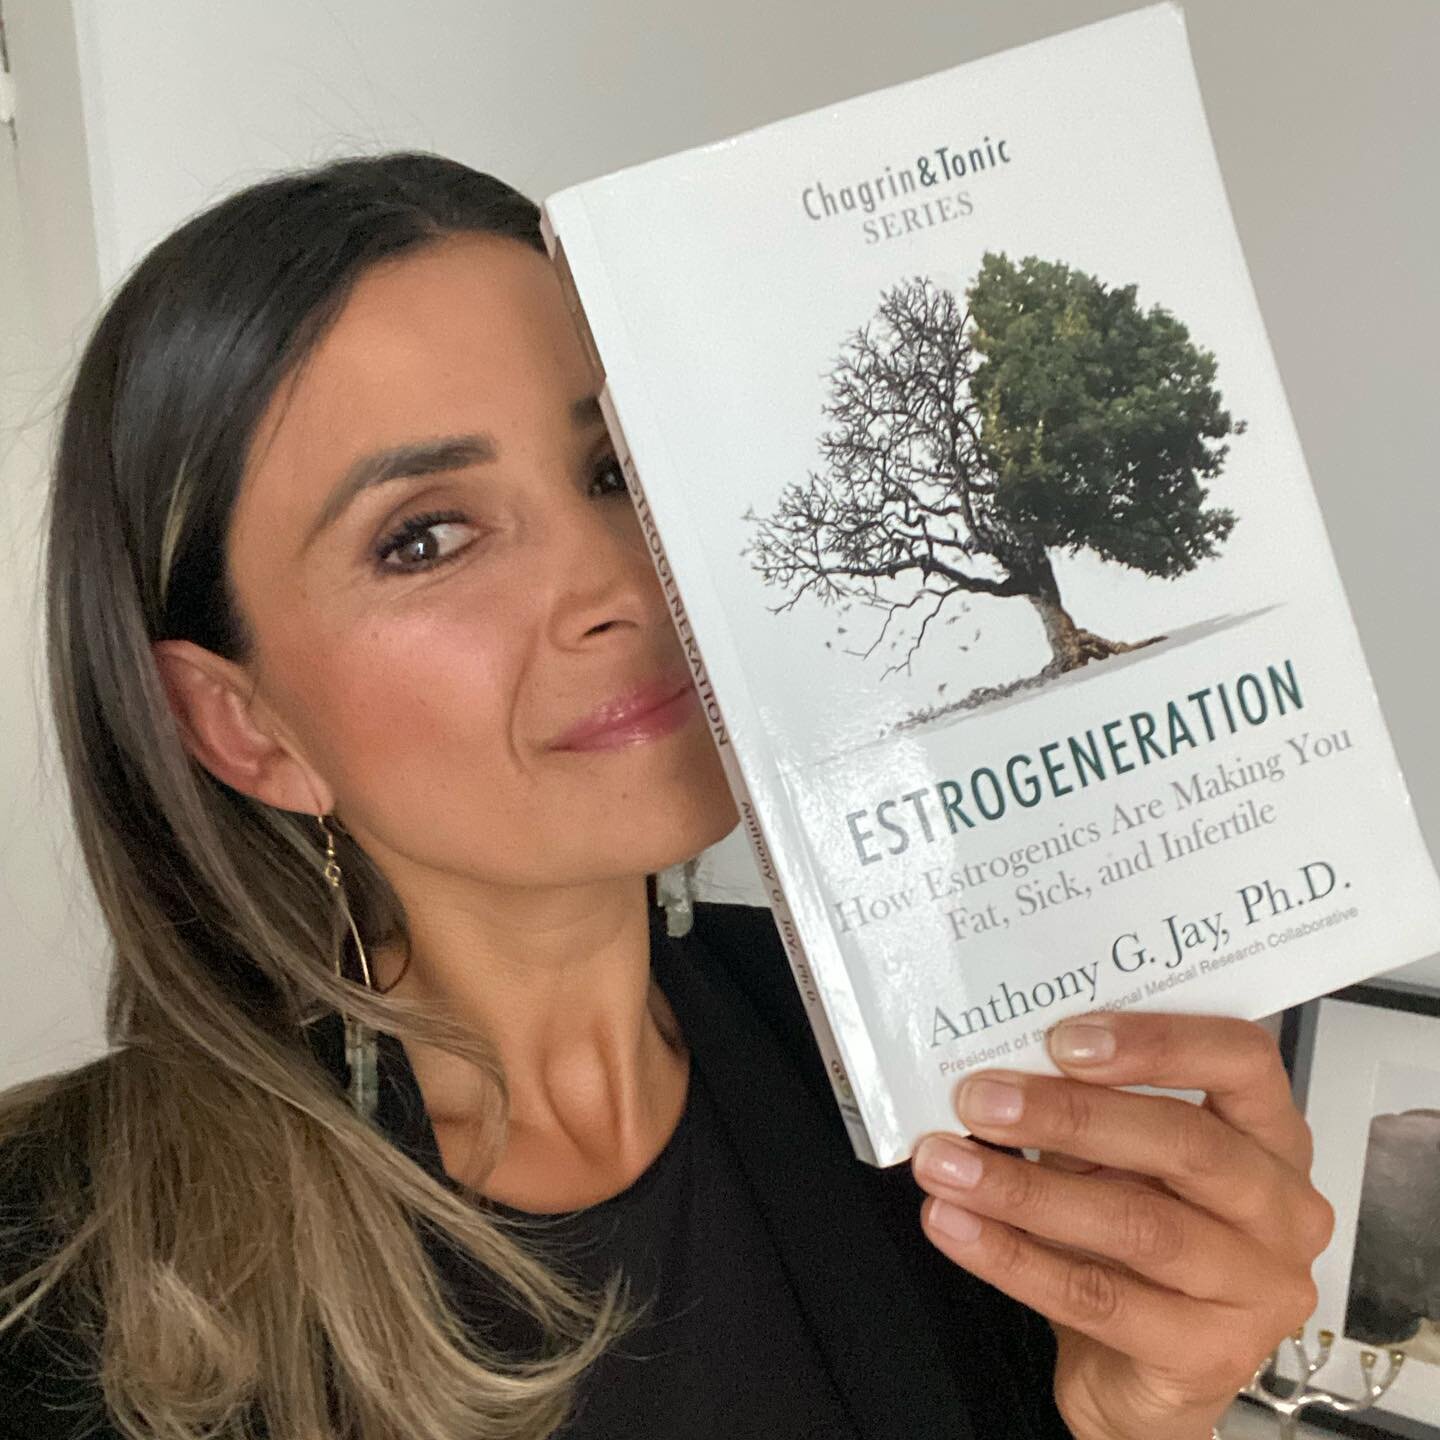 Spanish in comments 😉
I just finished this incredibly eye opening book by I&rsquo;ve been practicing for many years; ever since I heard the C- word at the oncologist office over 10+ years ago. Thank you @lowryisa for the recommendation 🙃

Dr @antho